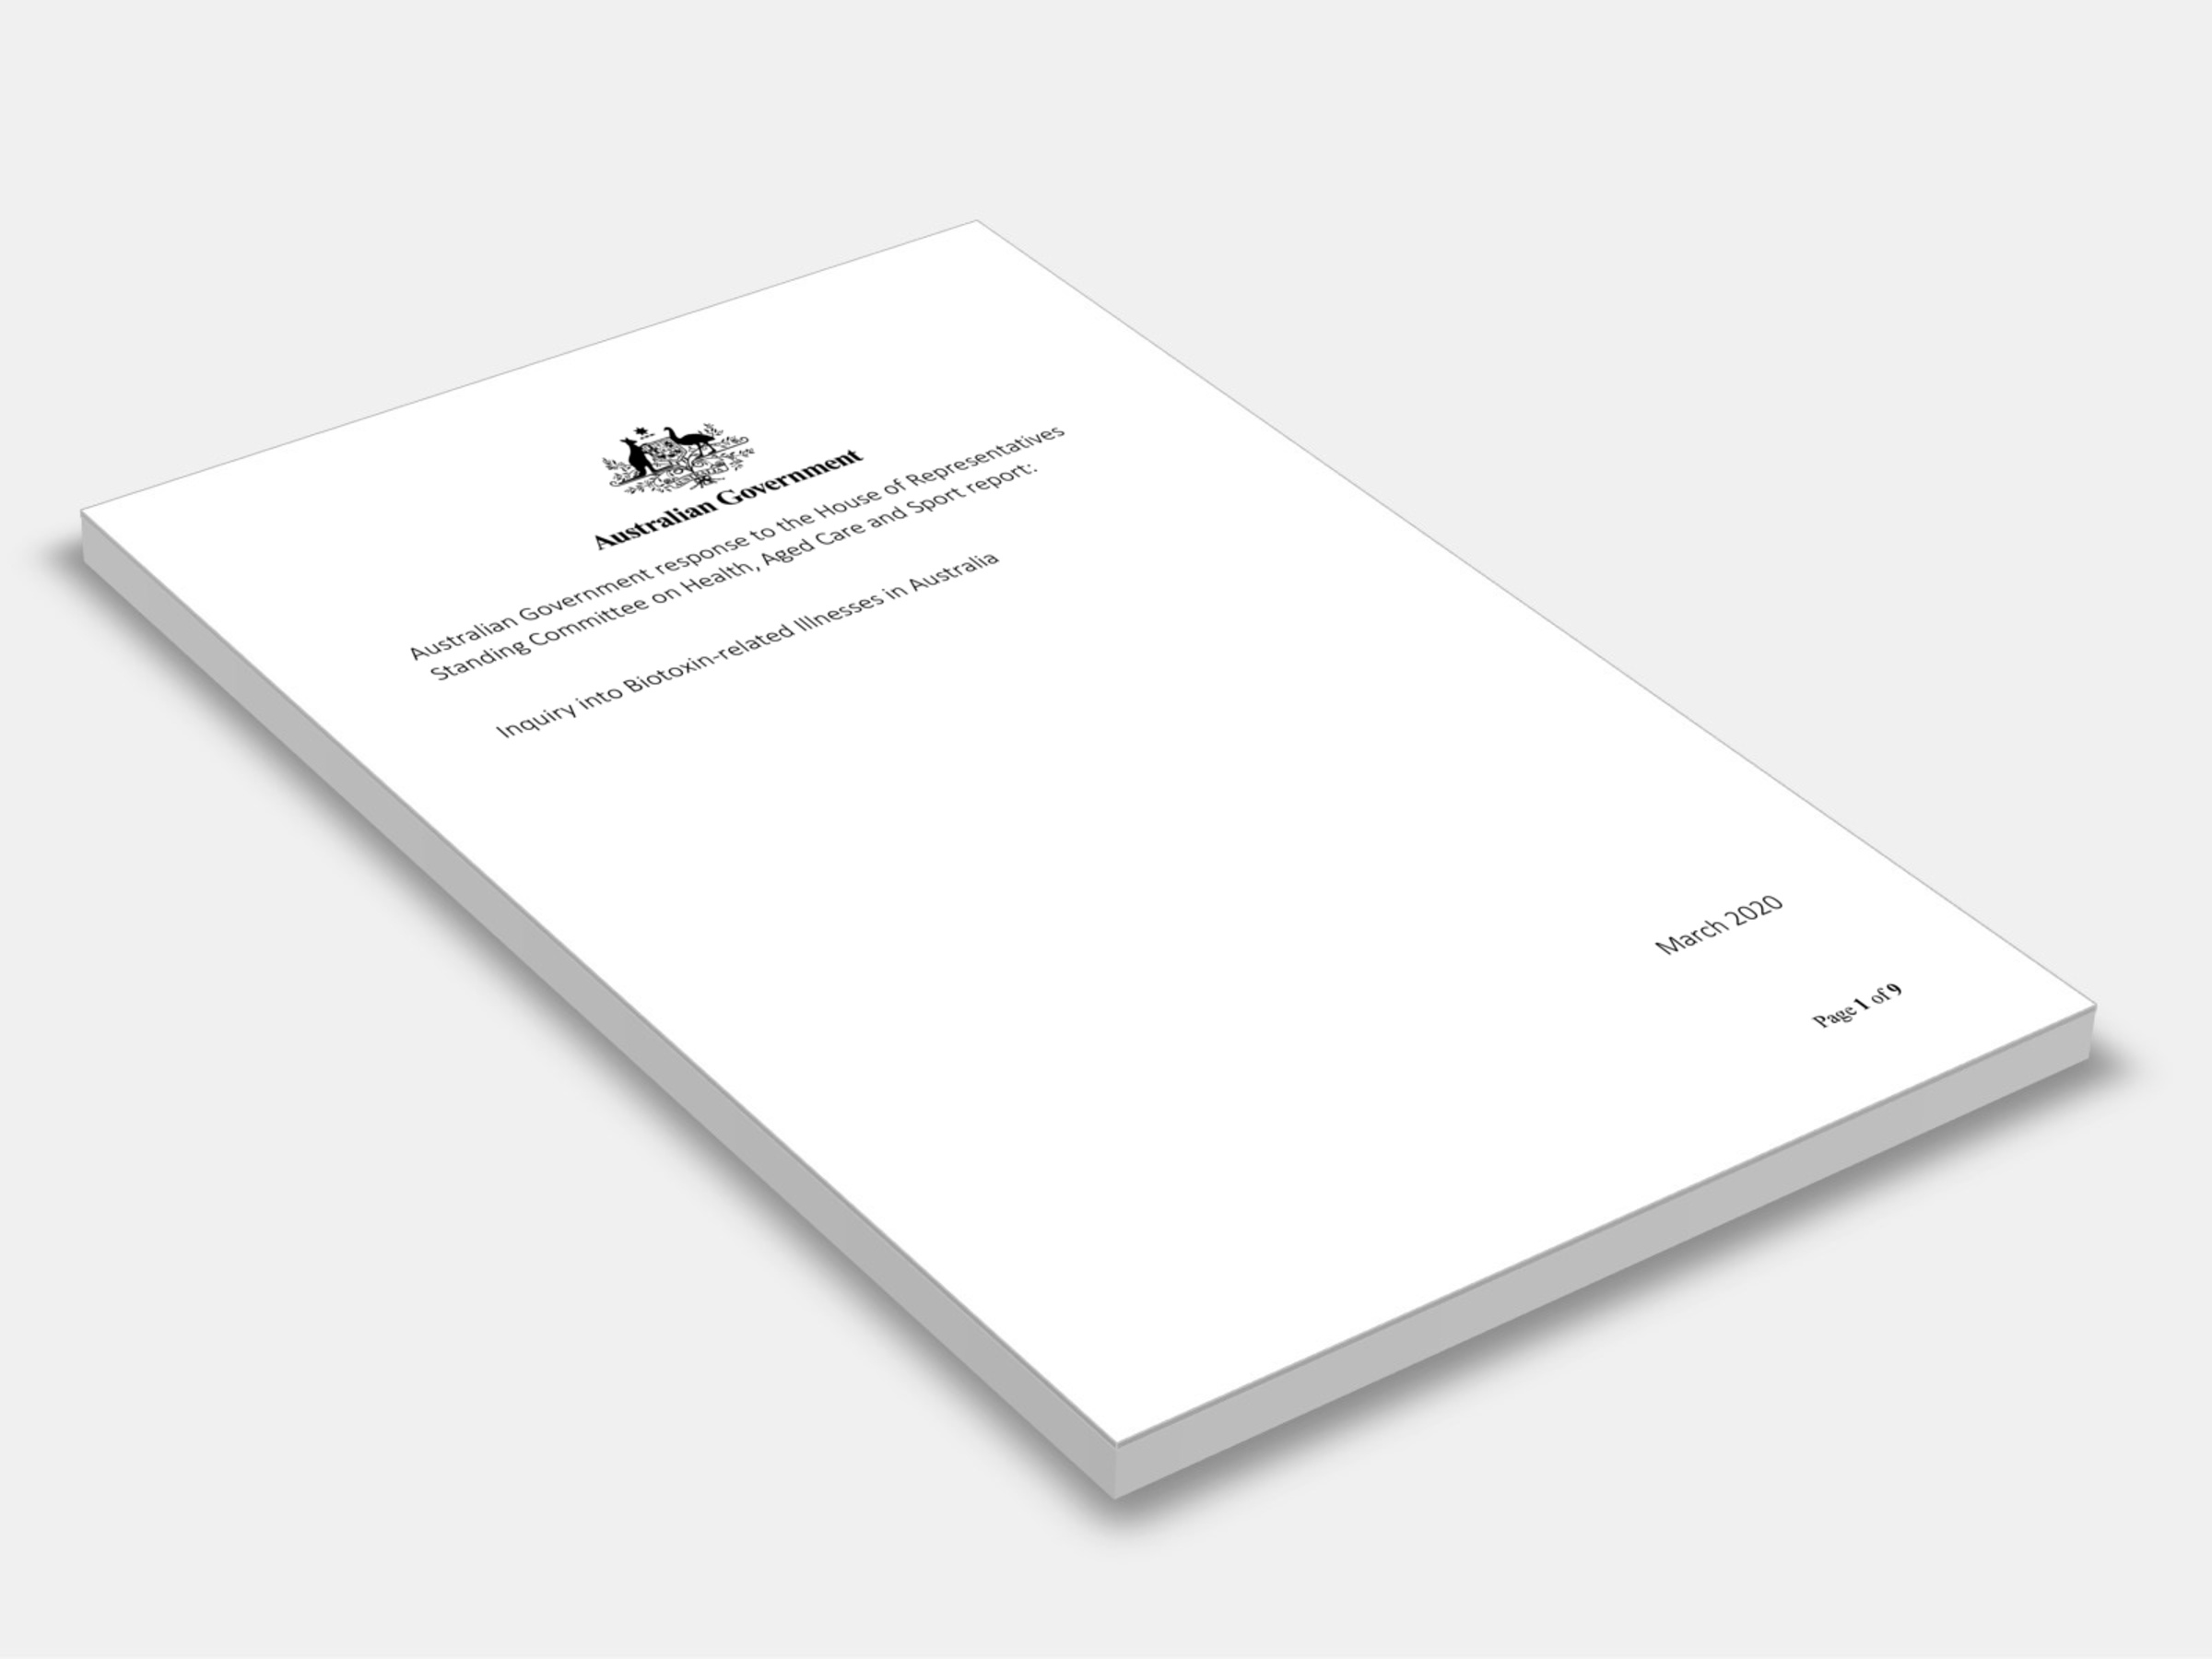 Australian Government response to the House of Representatives Standing Committee on Health, Aged Care and Sport report: 2020 cover